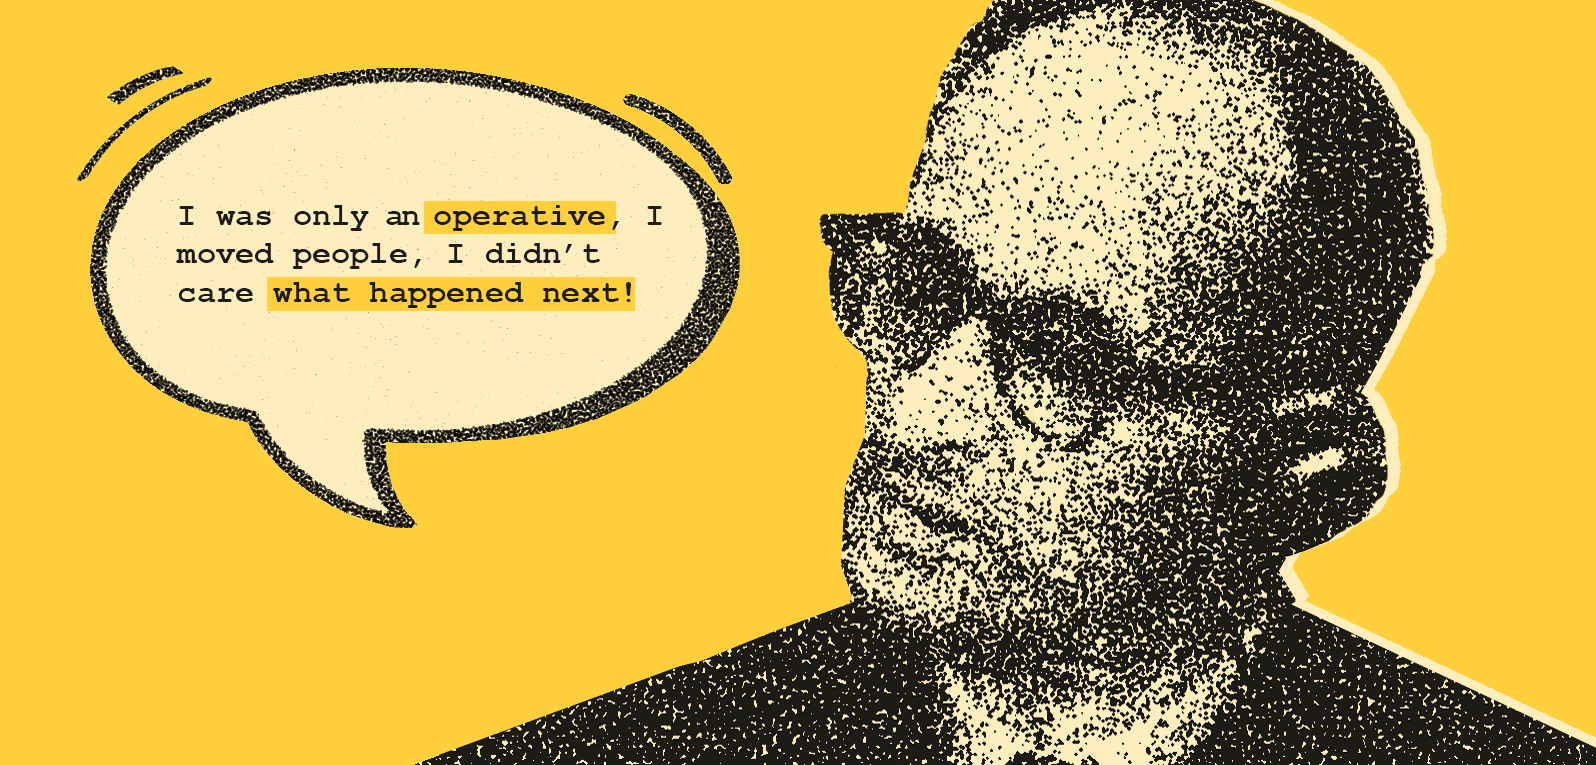 GIF illustration of Adolf Eichman with a word cloud combining these three sentences in loop: 1) I was only an operative, I moved people, I didn’t care what happened next. 2) I was only a designer, I made user flows,I didn’t care what happened next 3) I was only a carpenter, I made tables, I didn’t care what happened next.